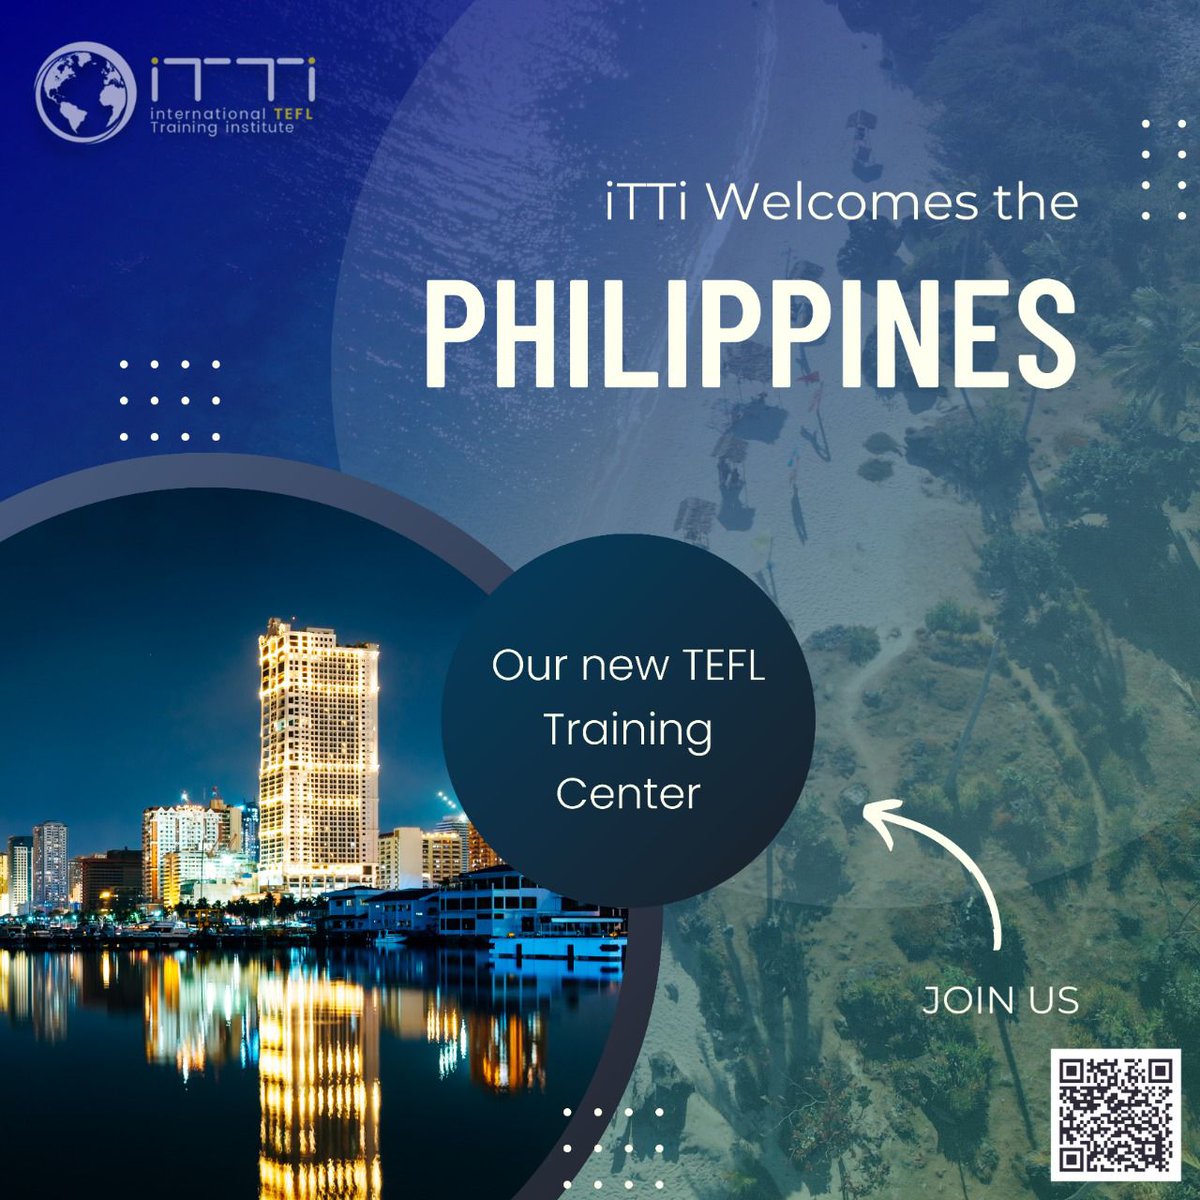 iTTi Philippines is the official training institution of International TEFL Training Institute (iTTi) for English language instructors in the Philippines. Our TEFL training courses ends in an internationally recognized certificate.

#itti #teflcertification